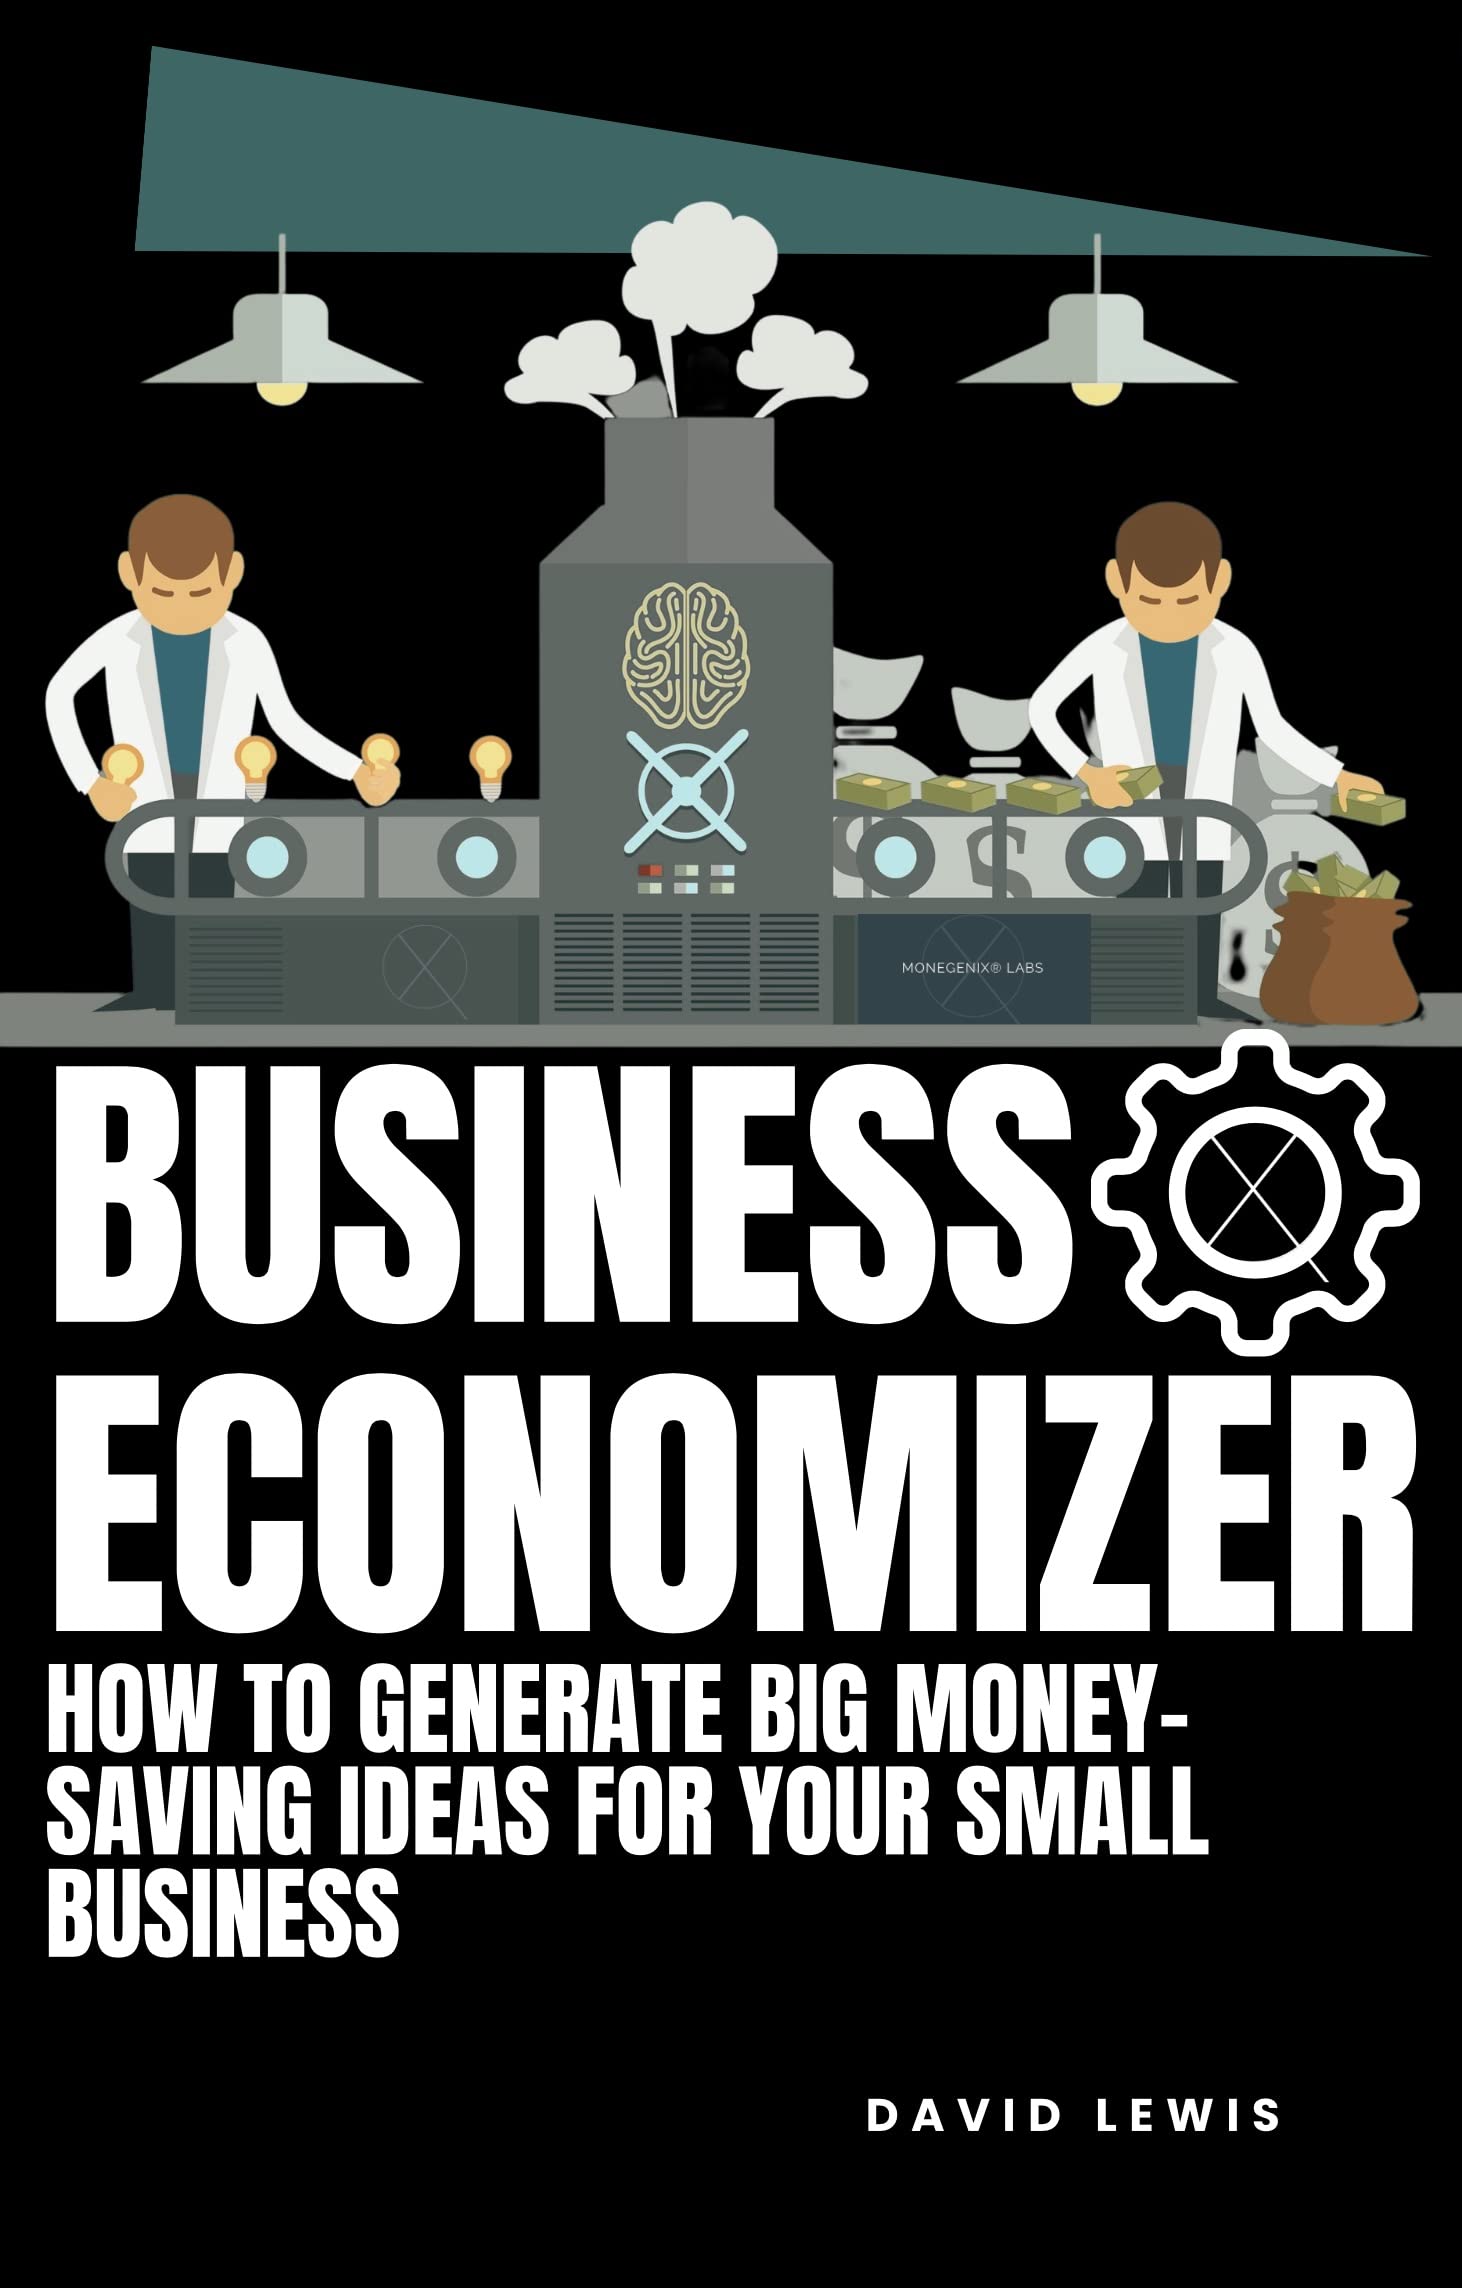 Business Economizer: How To Generate Big Money-Saving Ideas For Your Small Business